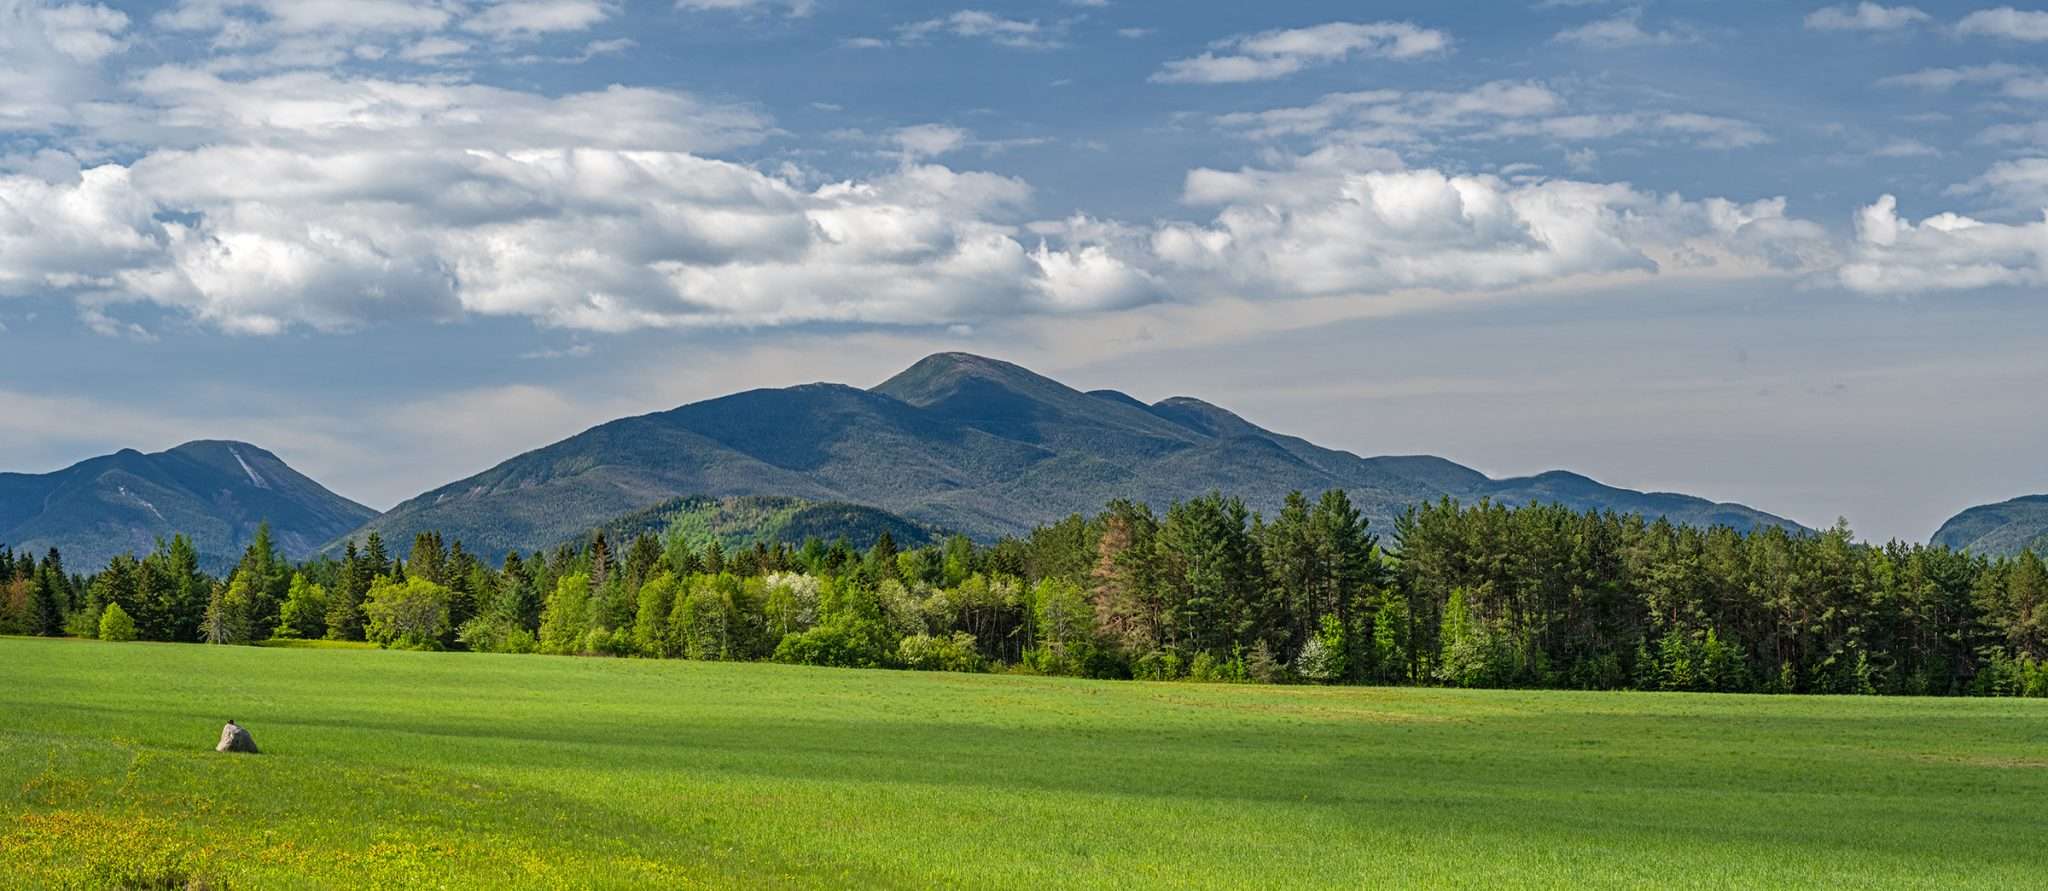 A view of the High Peaks from Adirondack Loj Road. Photo by John DiGiacomo, courtesy of Adirondack Land Trust